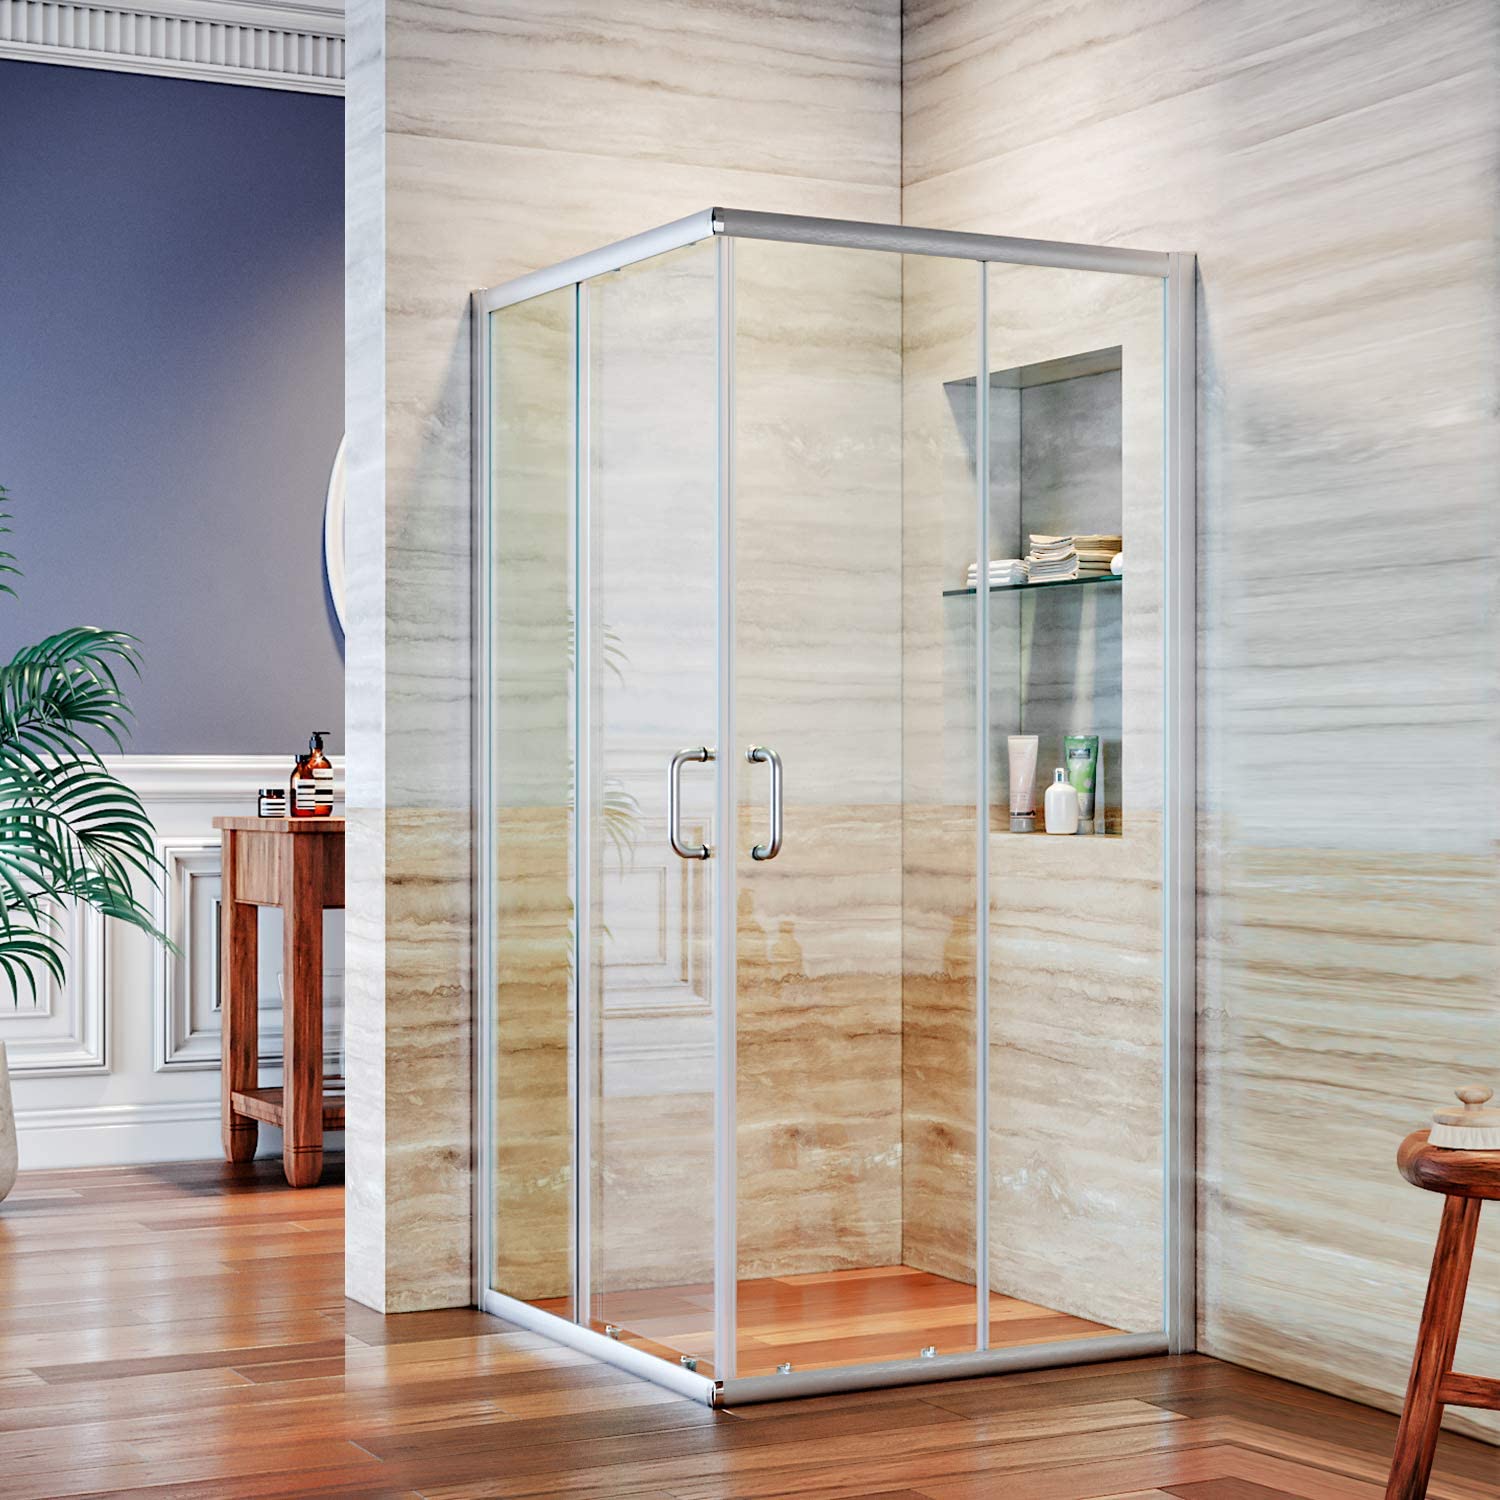 ELEGANT 36 in. D. x 36 in. W. x 72 in. H. 2 Opening Sliding Shower Enclosure